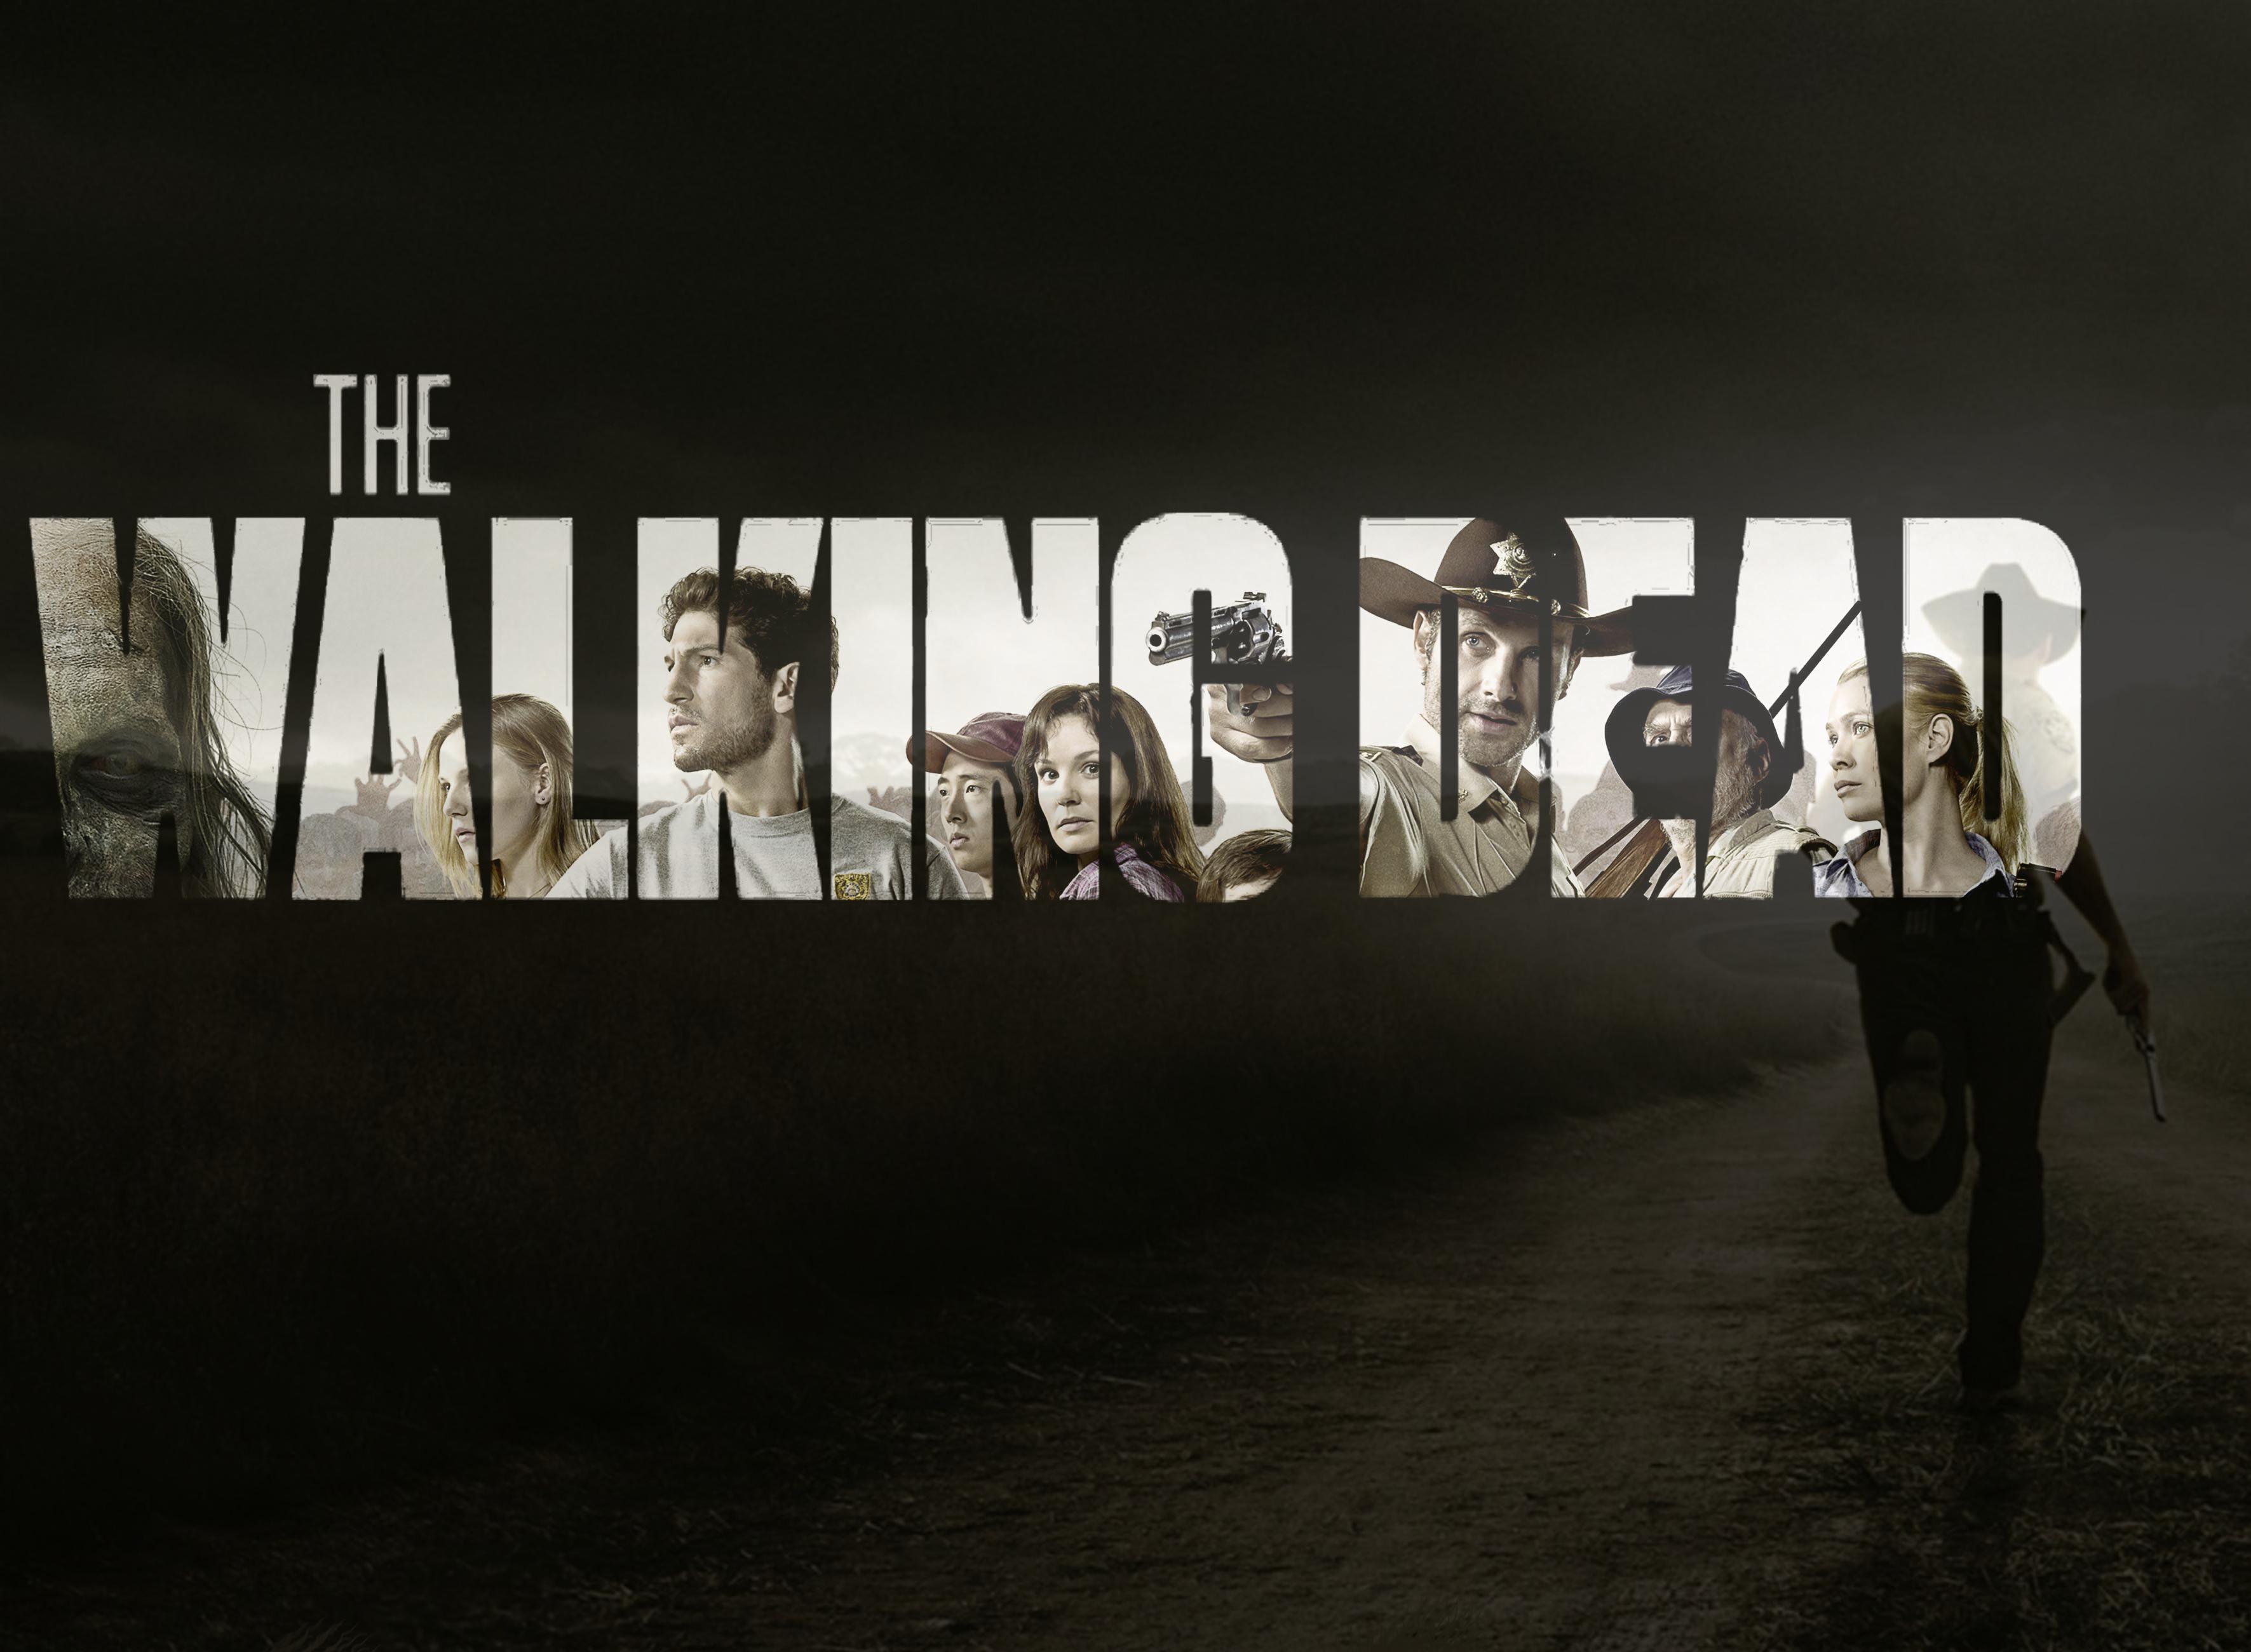 Magnificent The Walking Dead Wallpaper Full HD Pictures